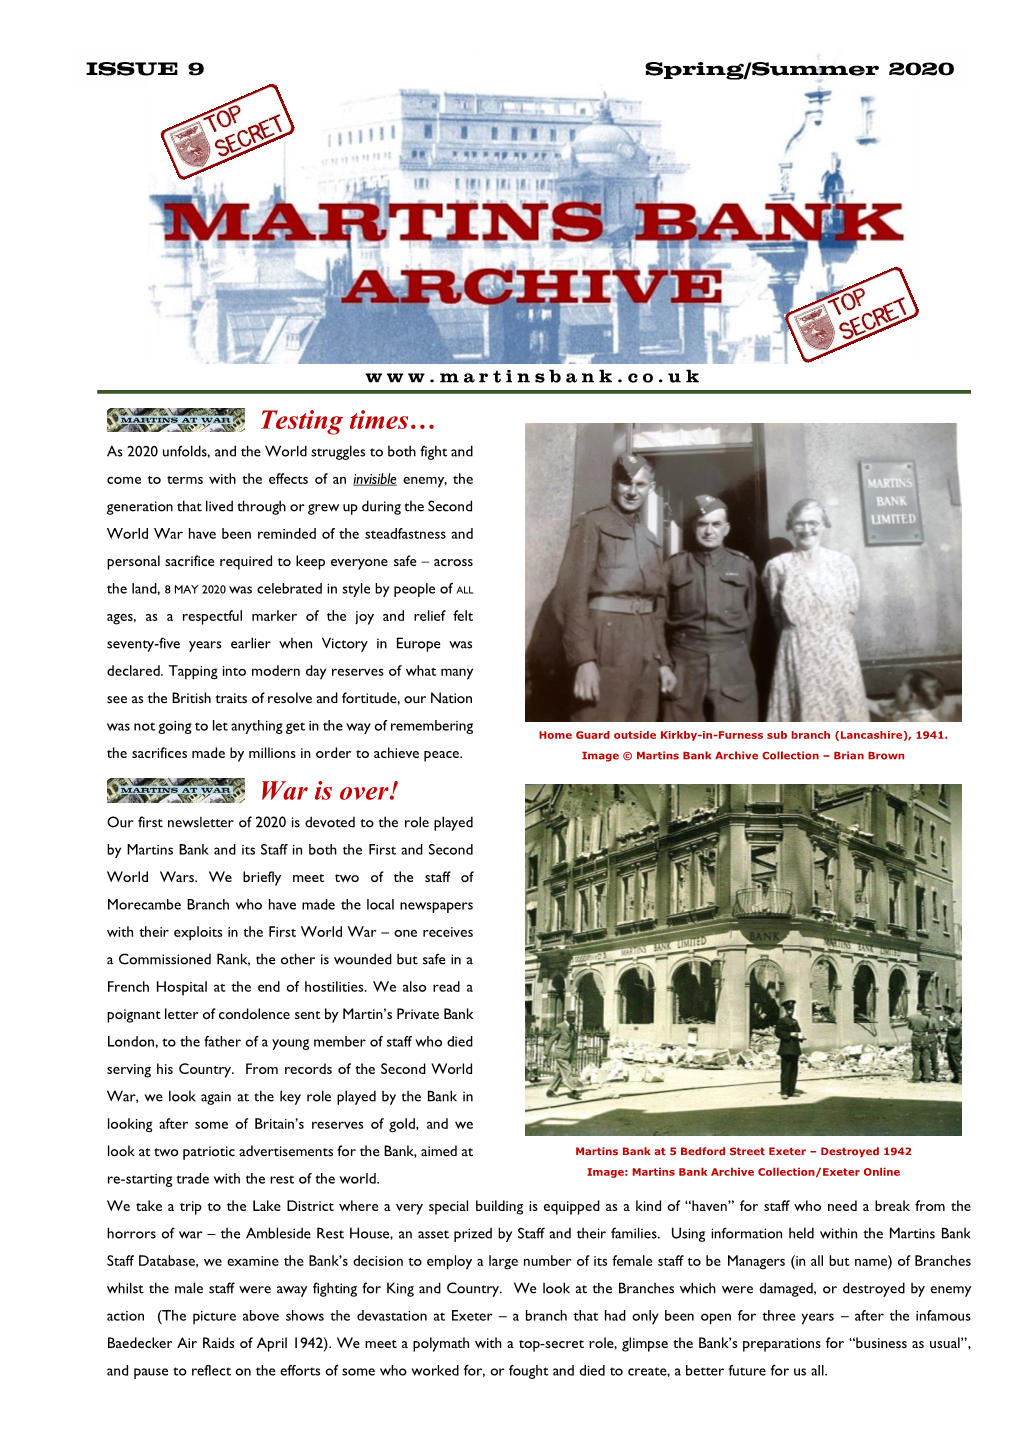 War Is Over! Our First Newsletter of 2020 Is Devoted to the Role Played by Martins Bank and Its Staff in Both the First and Second World Wars